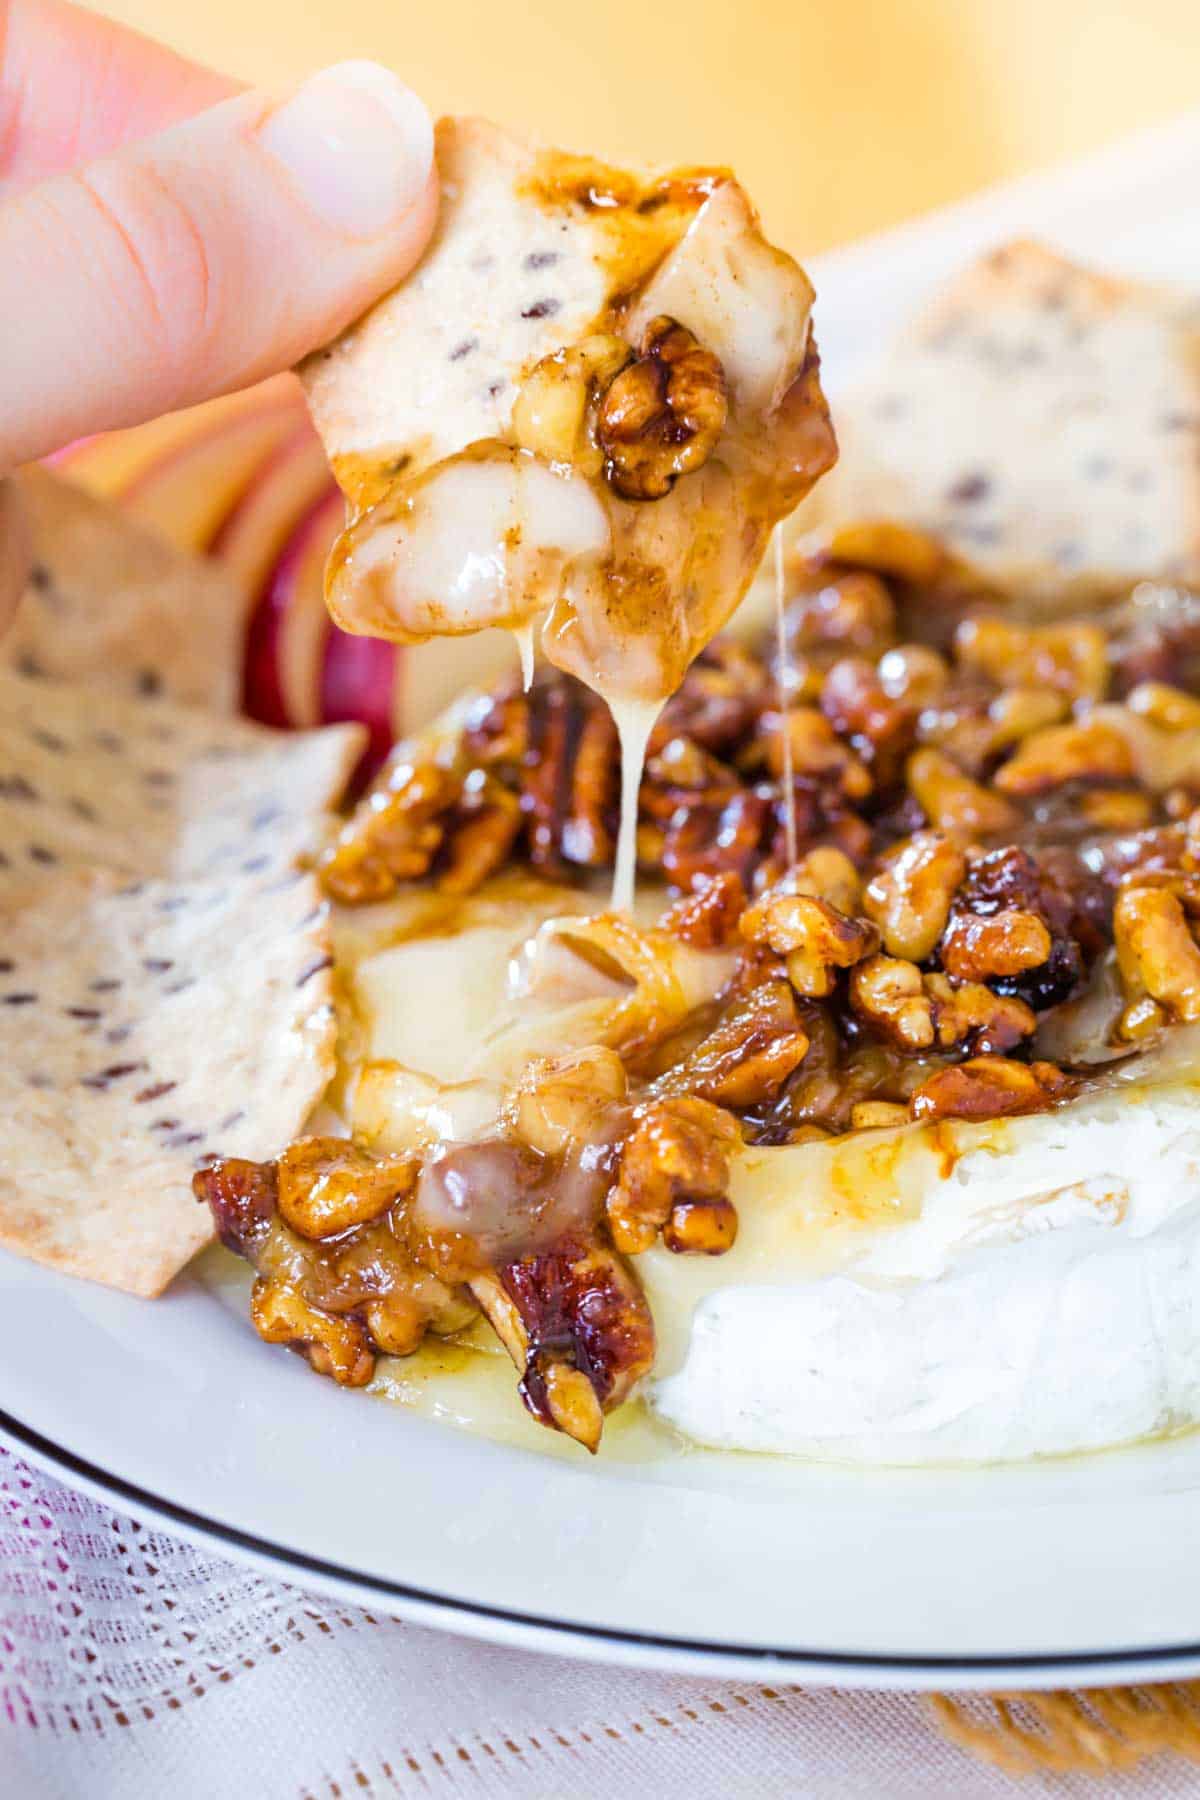 Melty baked brie and nuts dripping off of a cracker over the entire wheel served on a plate.